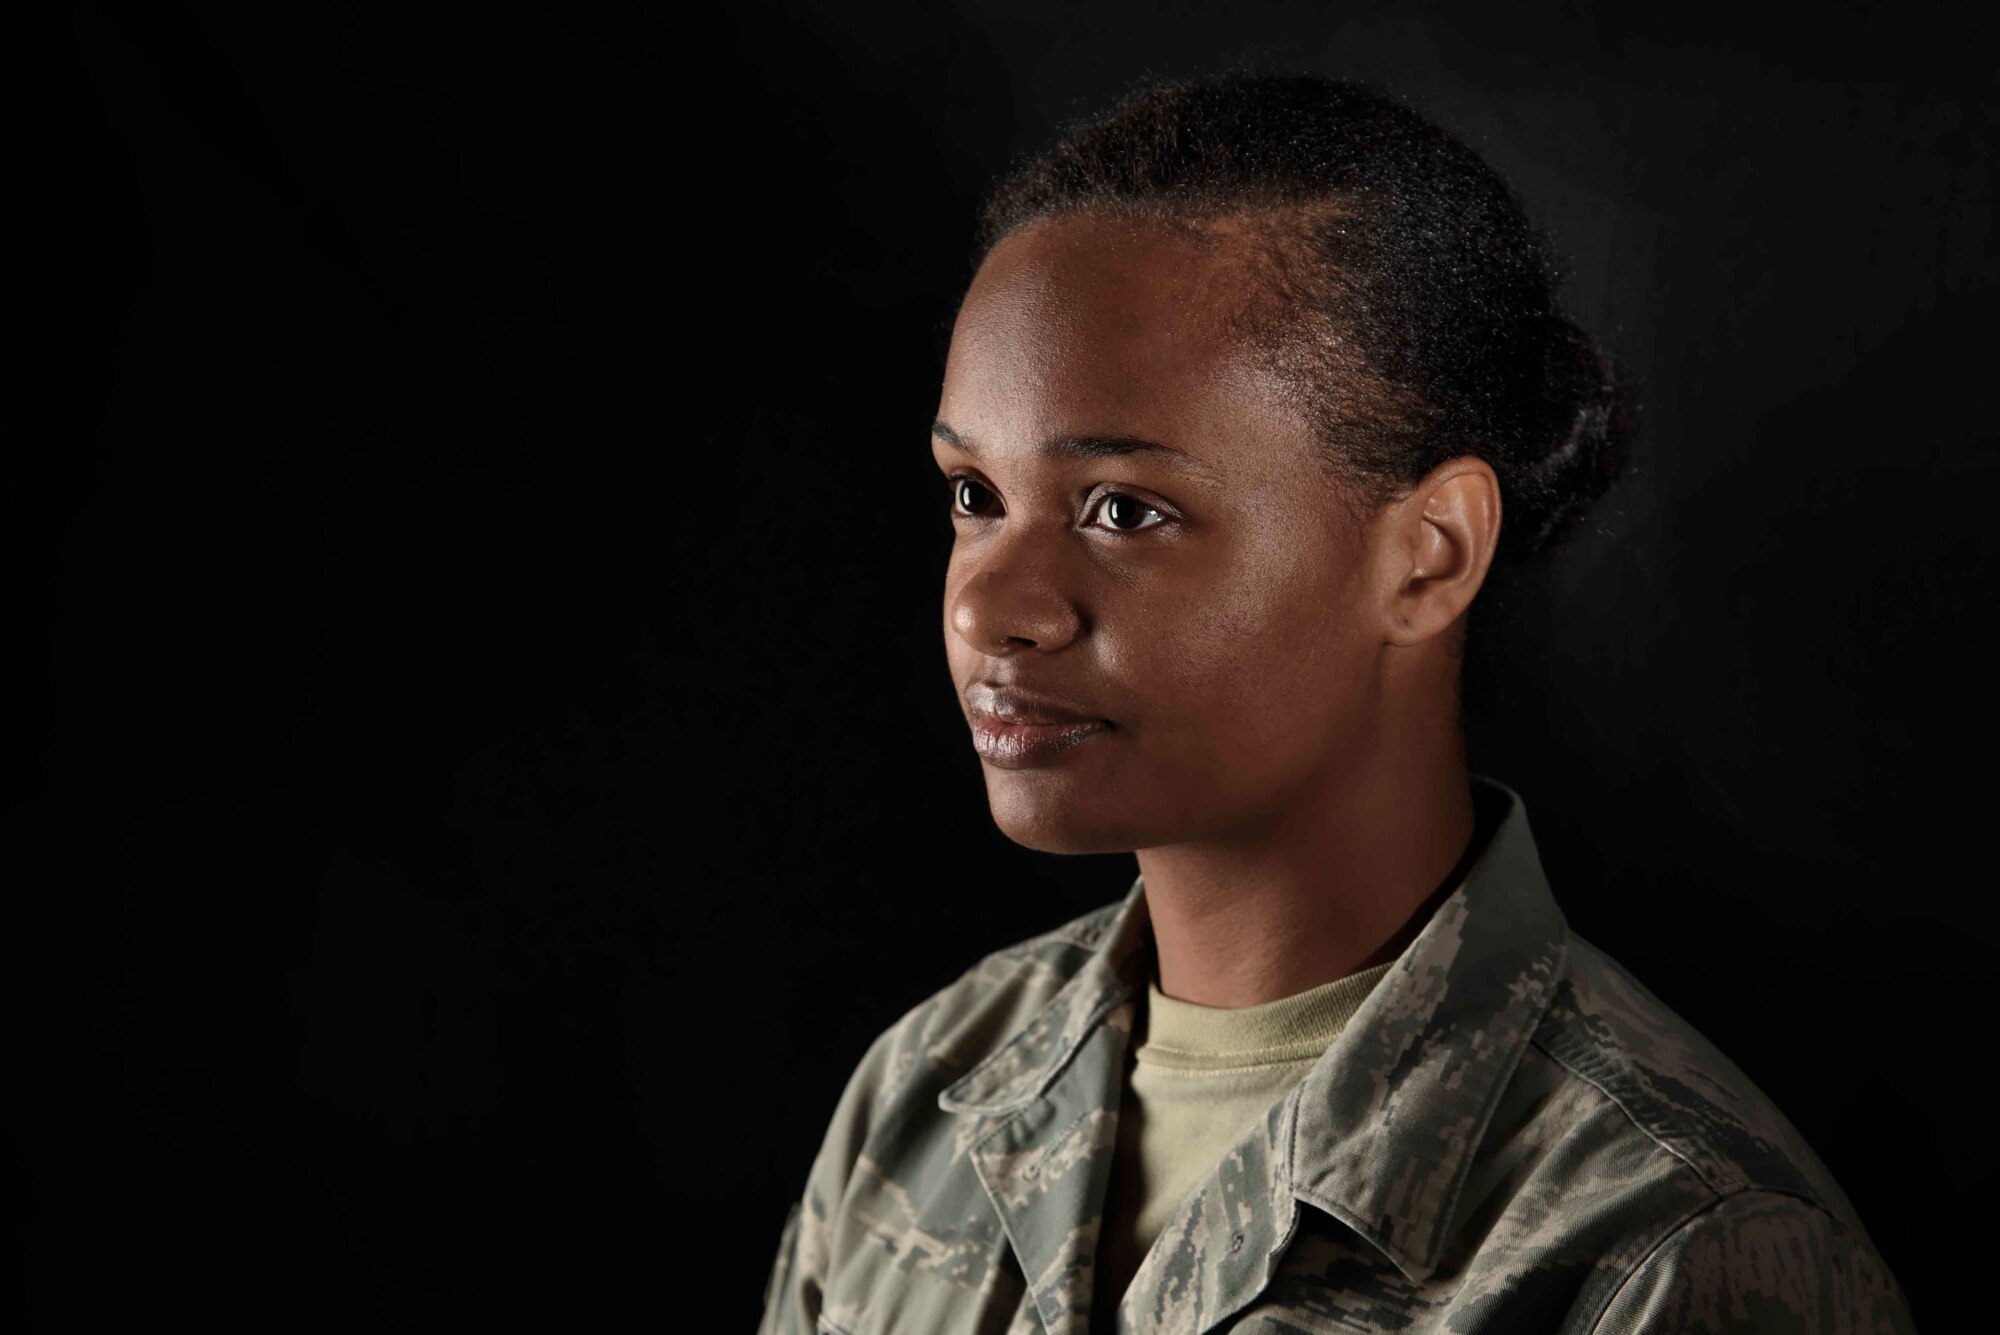 U.S. Air Force Senior Airman Augustine Thompson-Brown, 35th Medical Operations Squadron mental health technician, poses for a picture at Misawa Air Base, Japan, Oct. 13, 2015. Thompson-Brown spent most of her life homeless before joining the Air Force and is sharing her story to inspire others to conquer their own difficulties. (U.S. Air Force photo by Airman 1st Class Jordyn Fetter/Released)